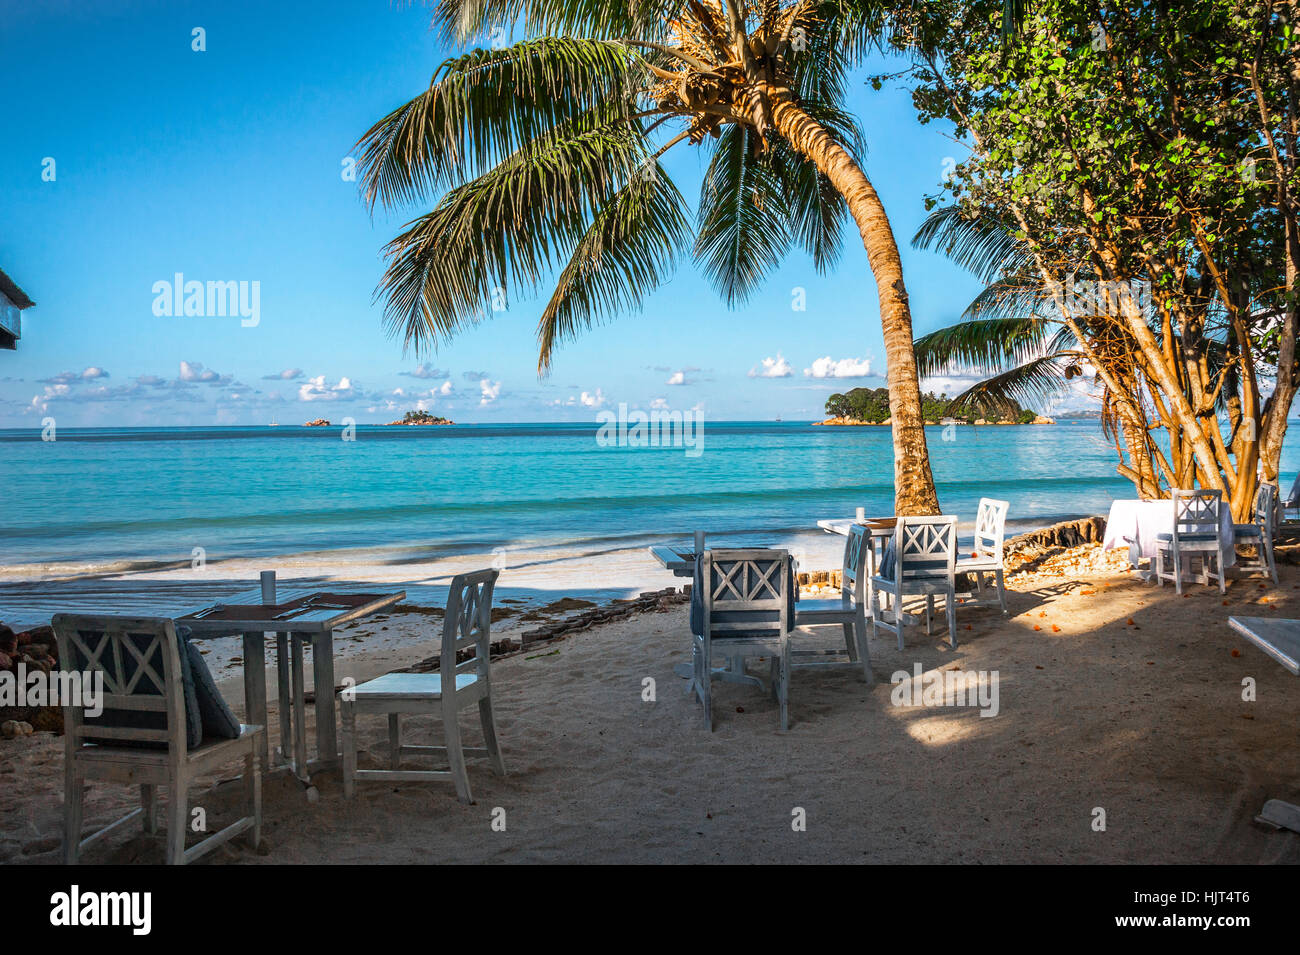 Beach of the Seychelles with table and chairs, Island Praslin, Beach Anse Volbert Stock Photo